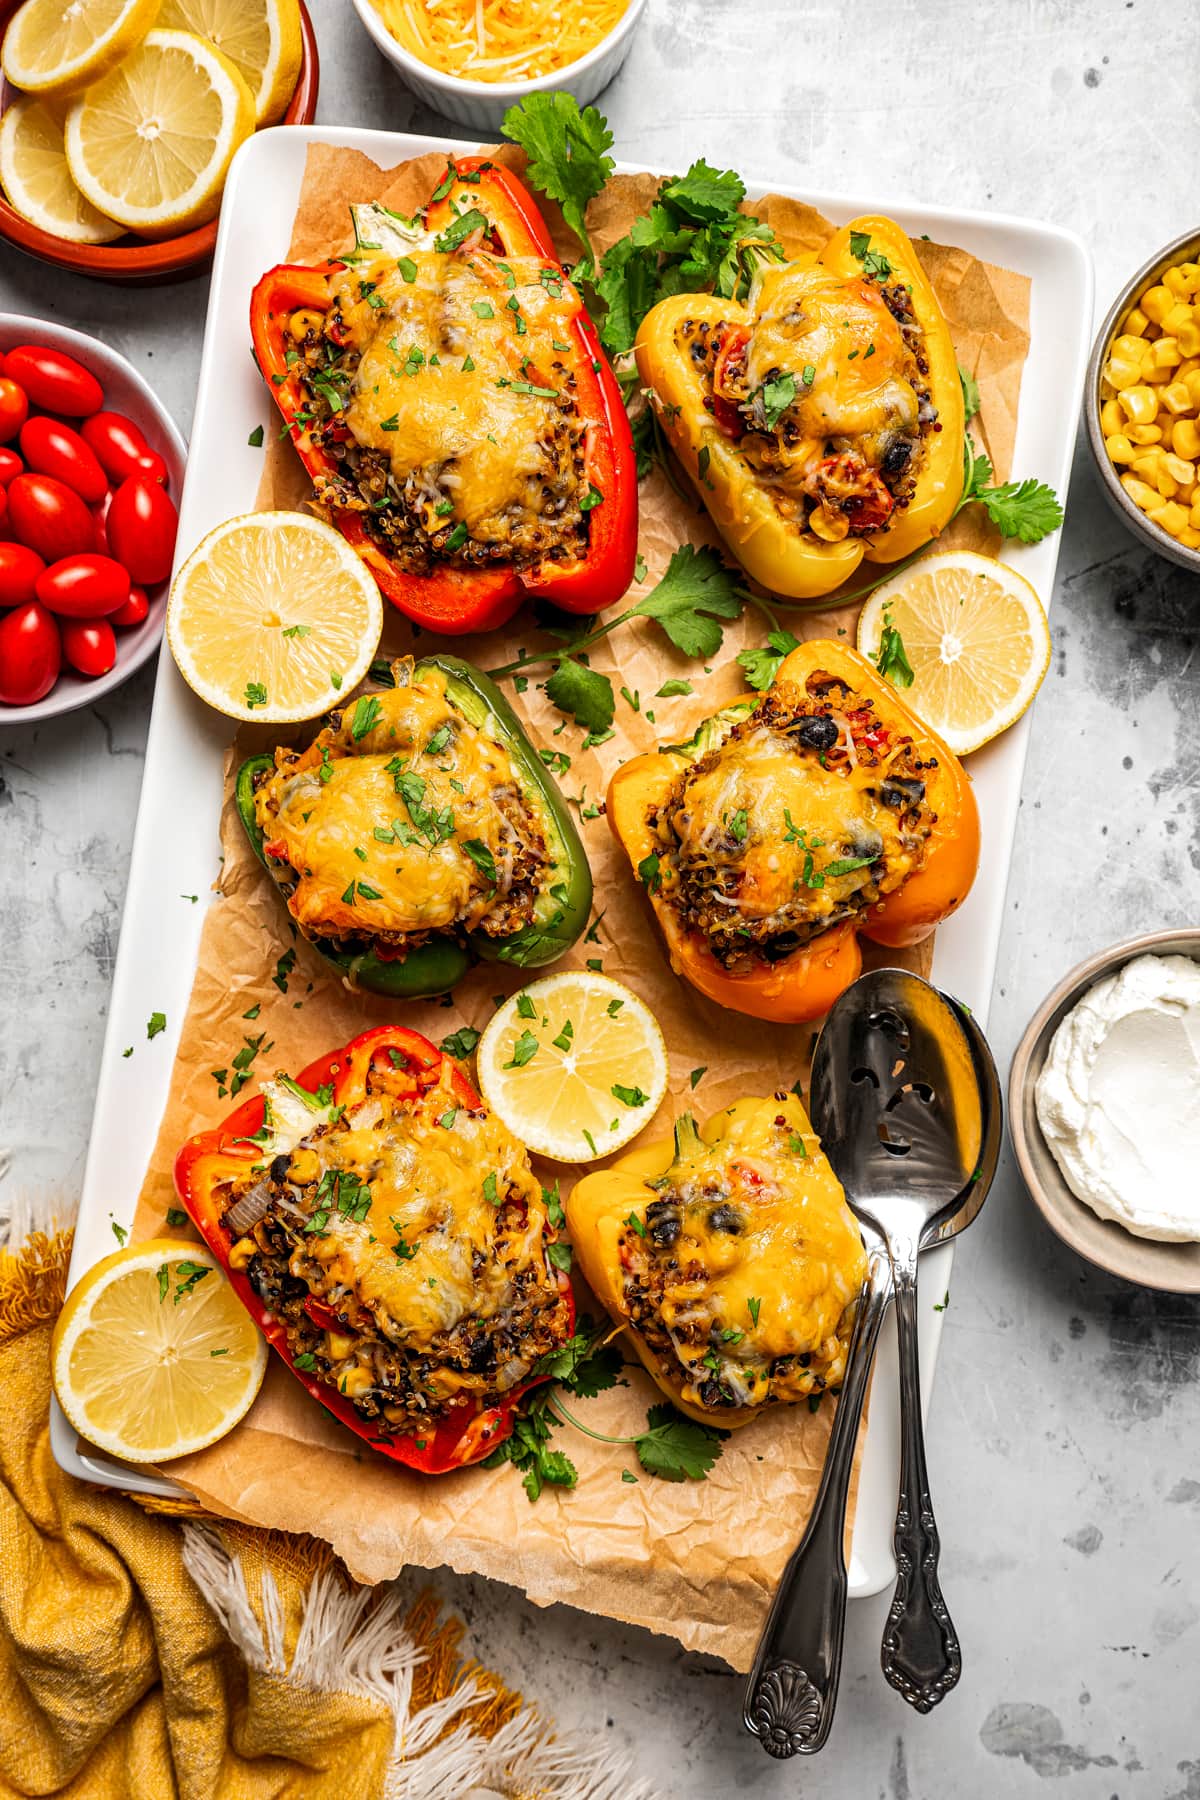 Overhead image of Southwestern quinoa stuffed peppers served on a platter.